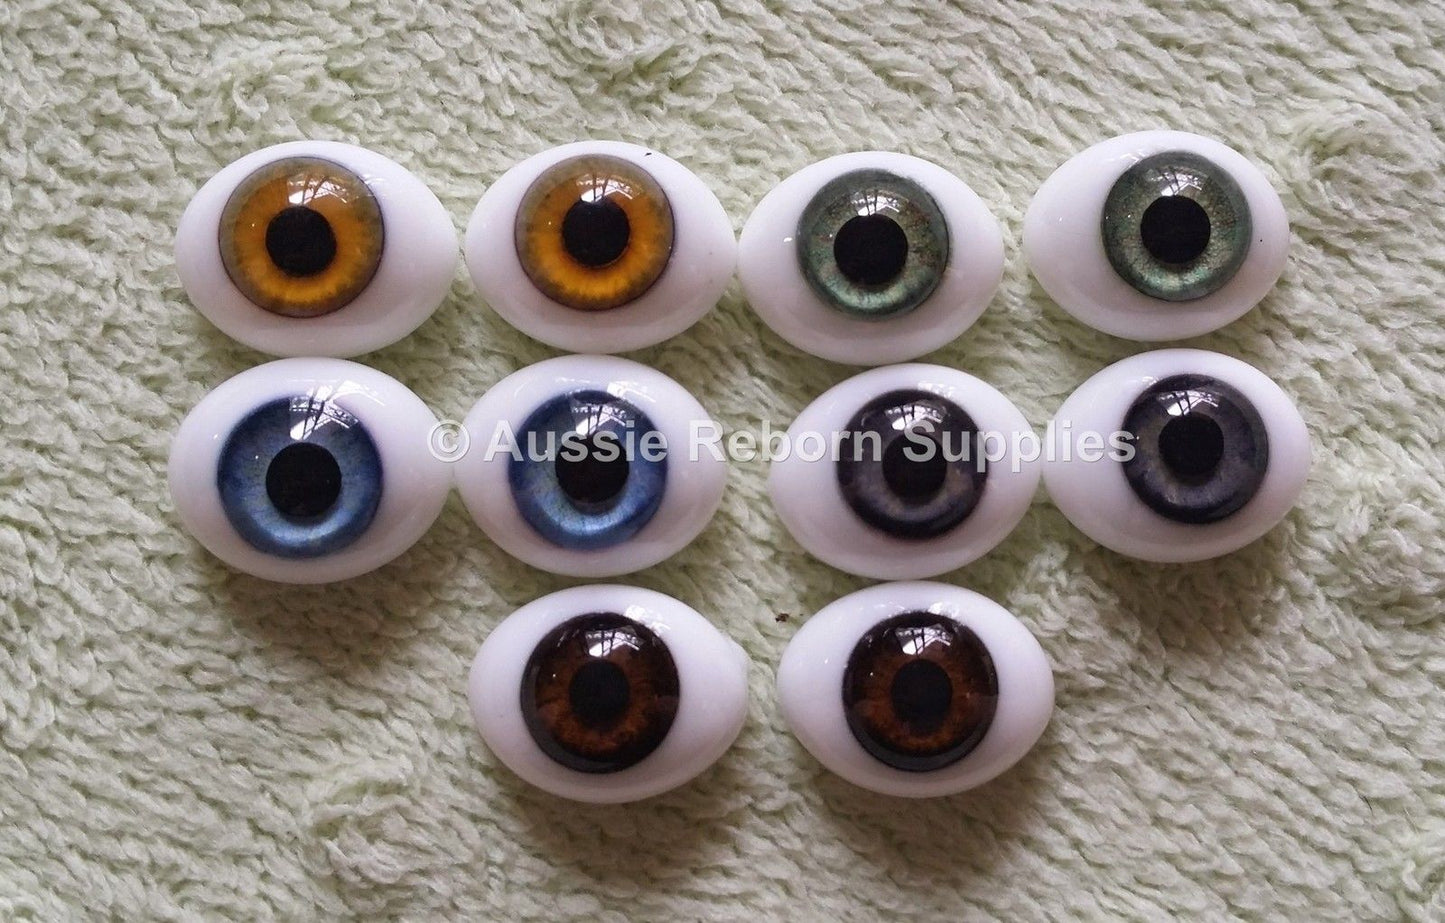 18mm Brown Oval Glass Eyes Reborn Baby Doll Making Supplies